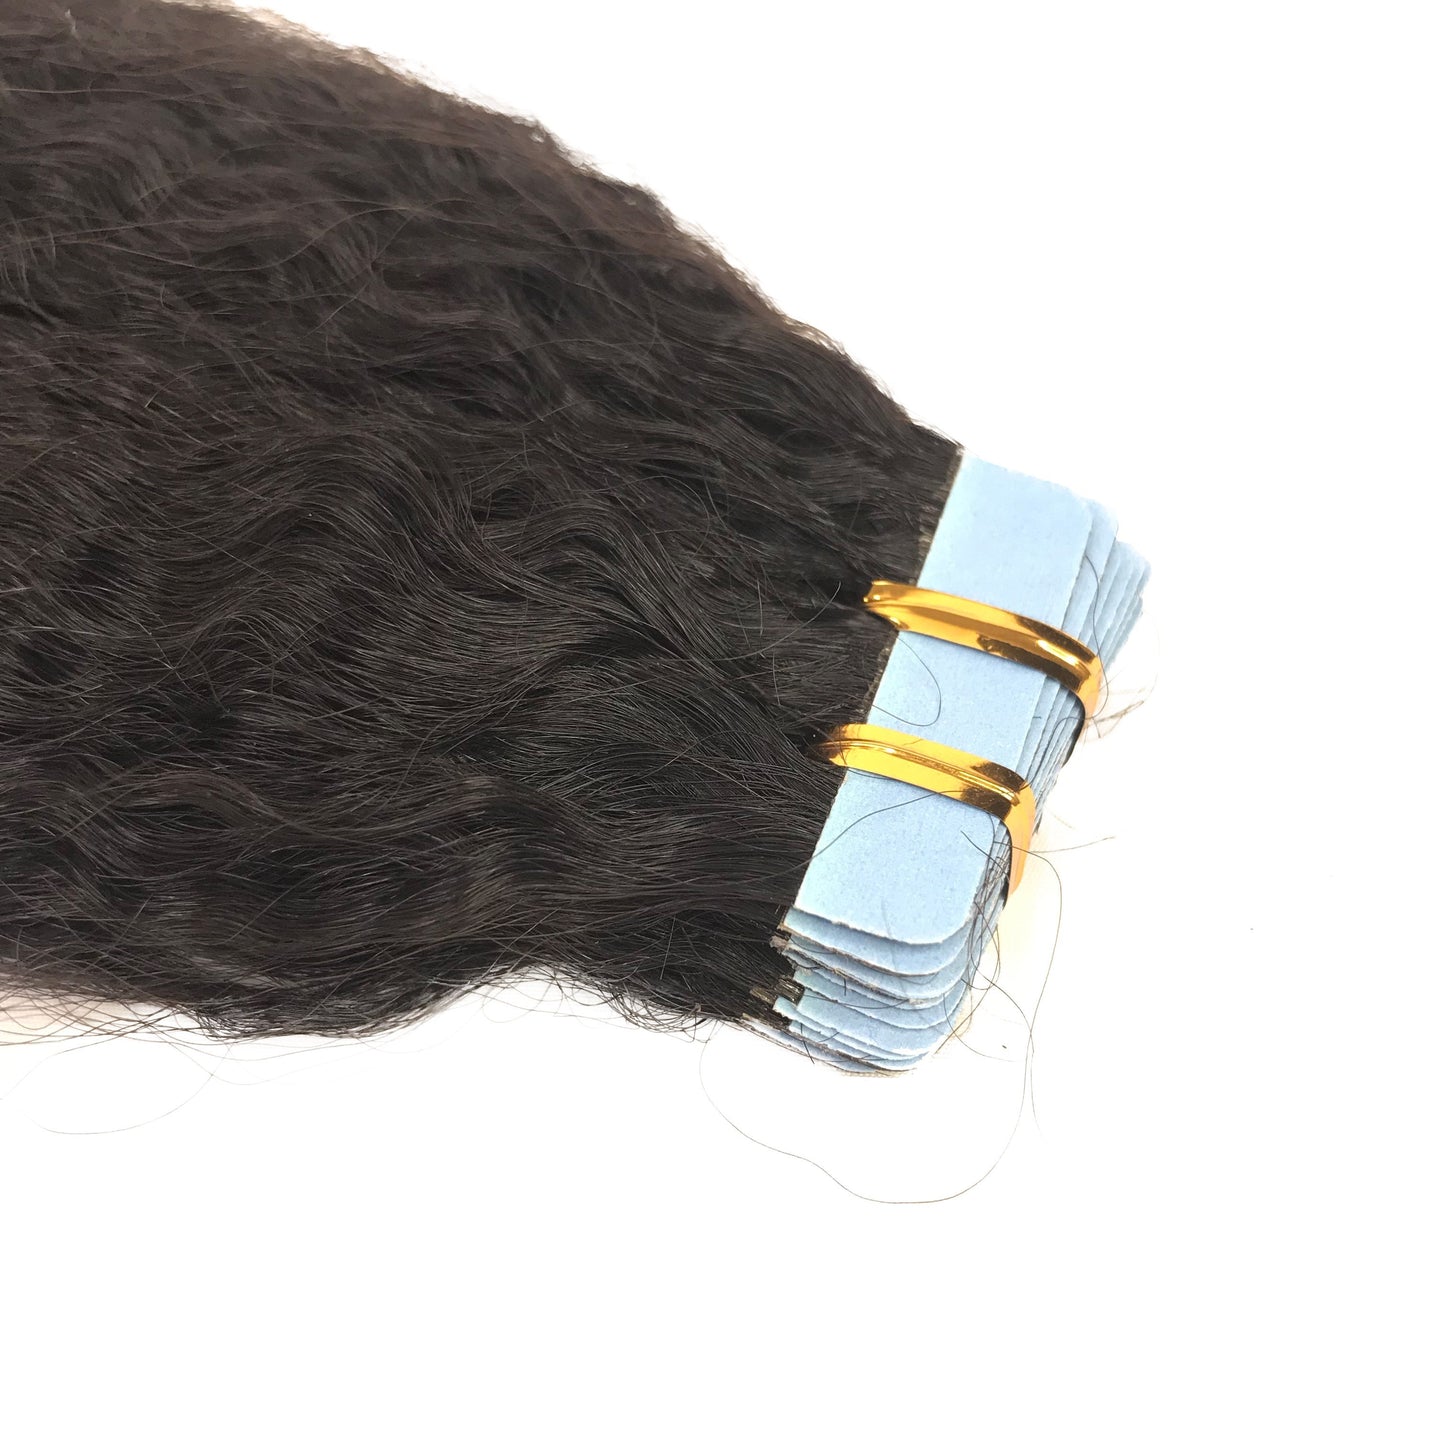 Kinky Straight Tape-In Human Hair Extension Natural